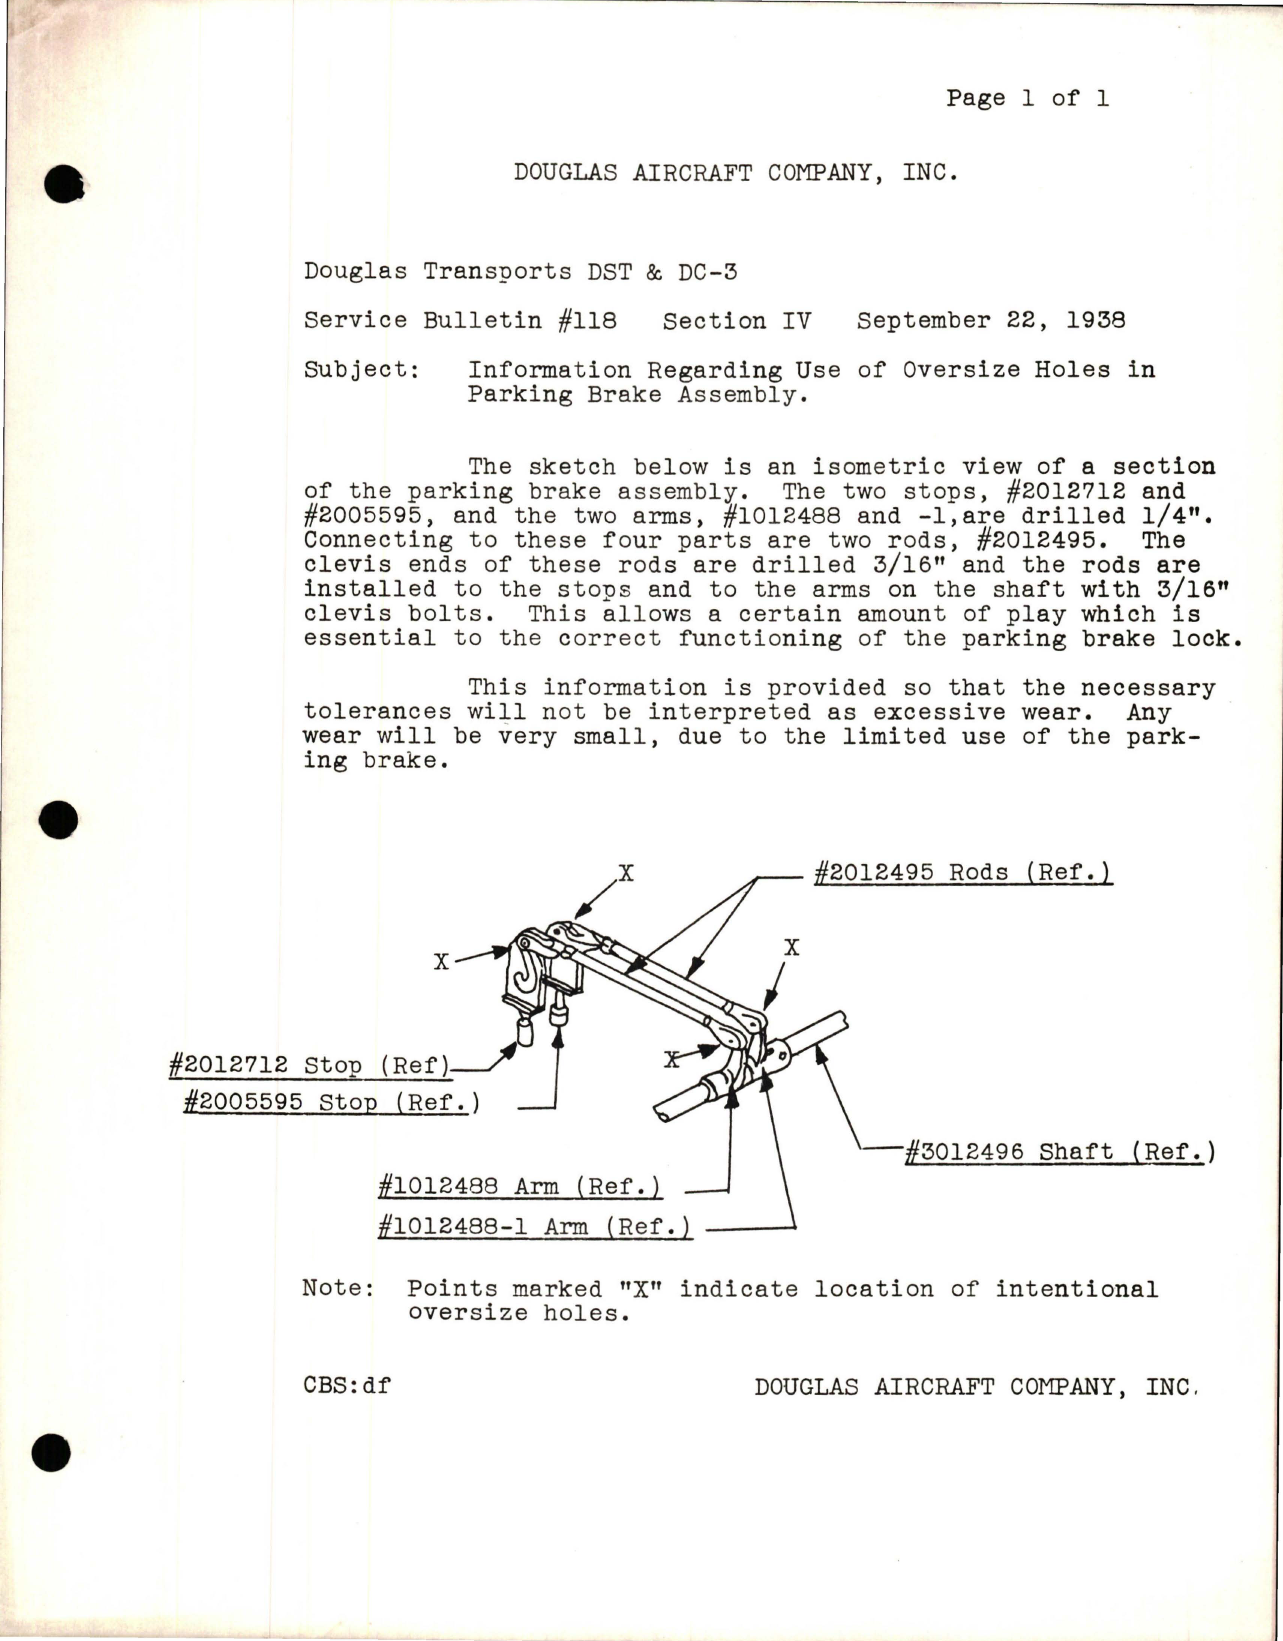 Sample page 1 from AirCorps Library document: Information Regarding Use of Oversize Holes in Parking Brake Assembly